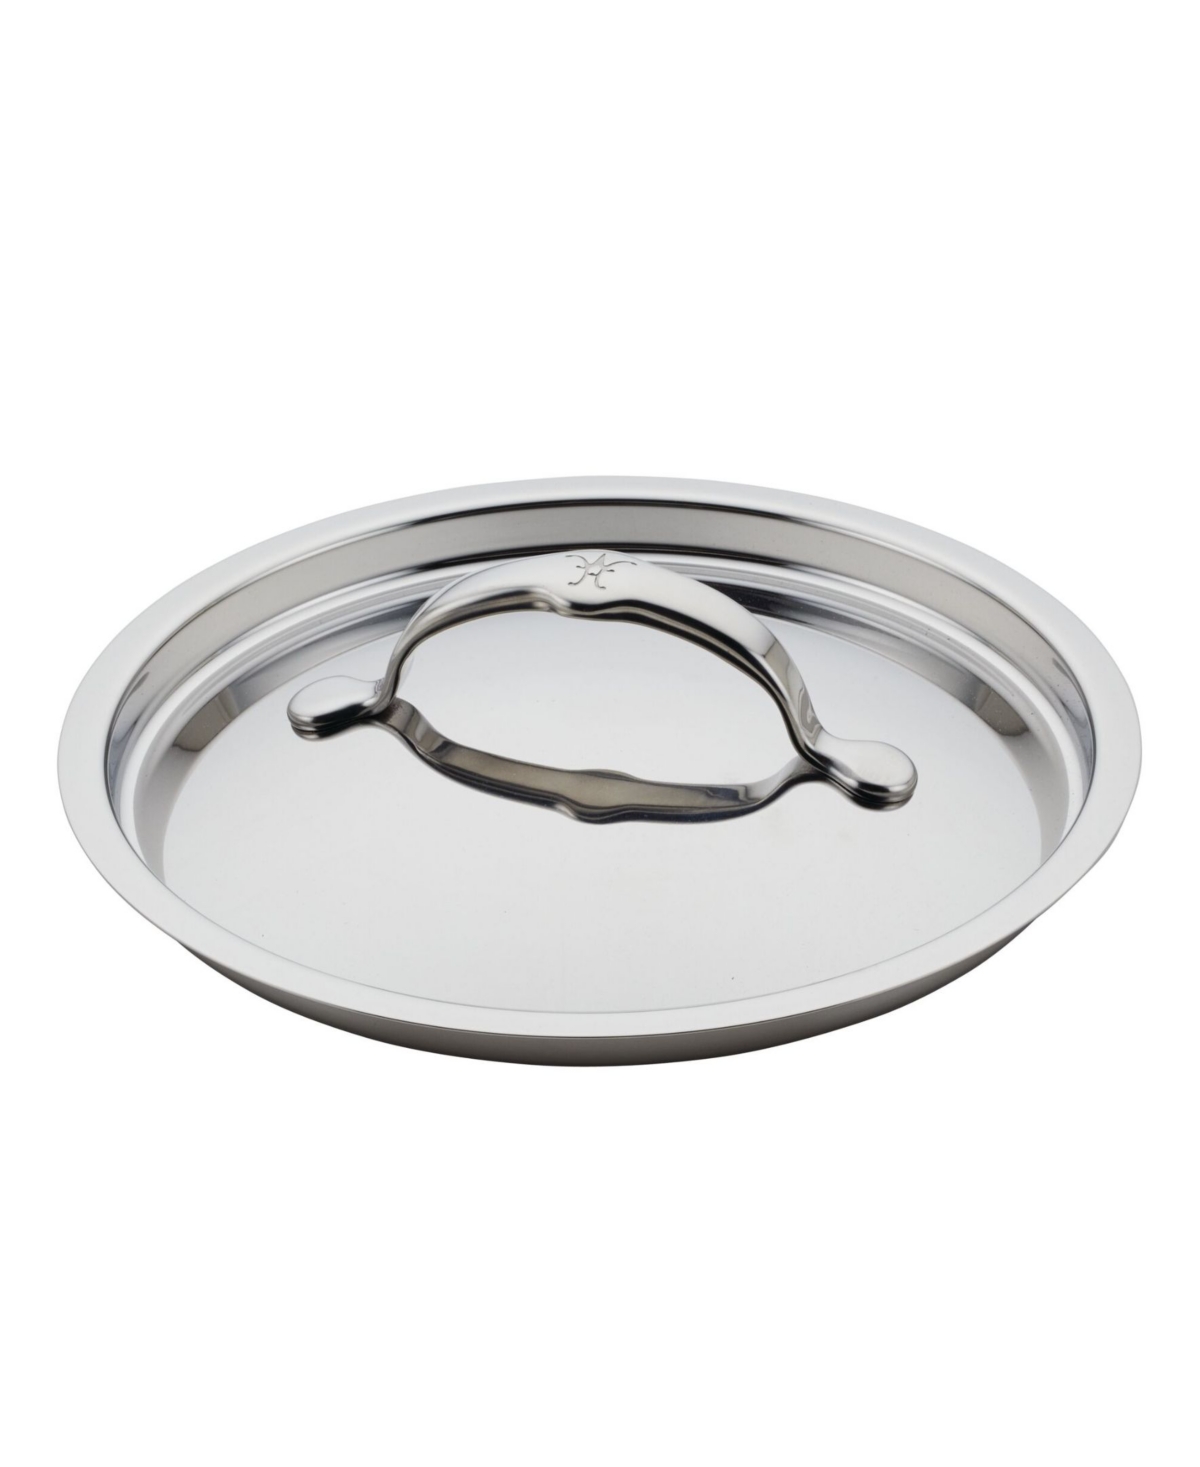 Shop Hestan Provisions Stainless Steel 8.5" Lid